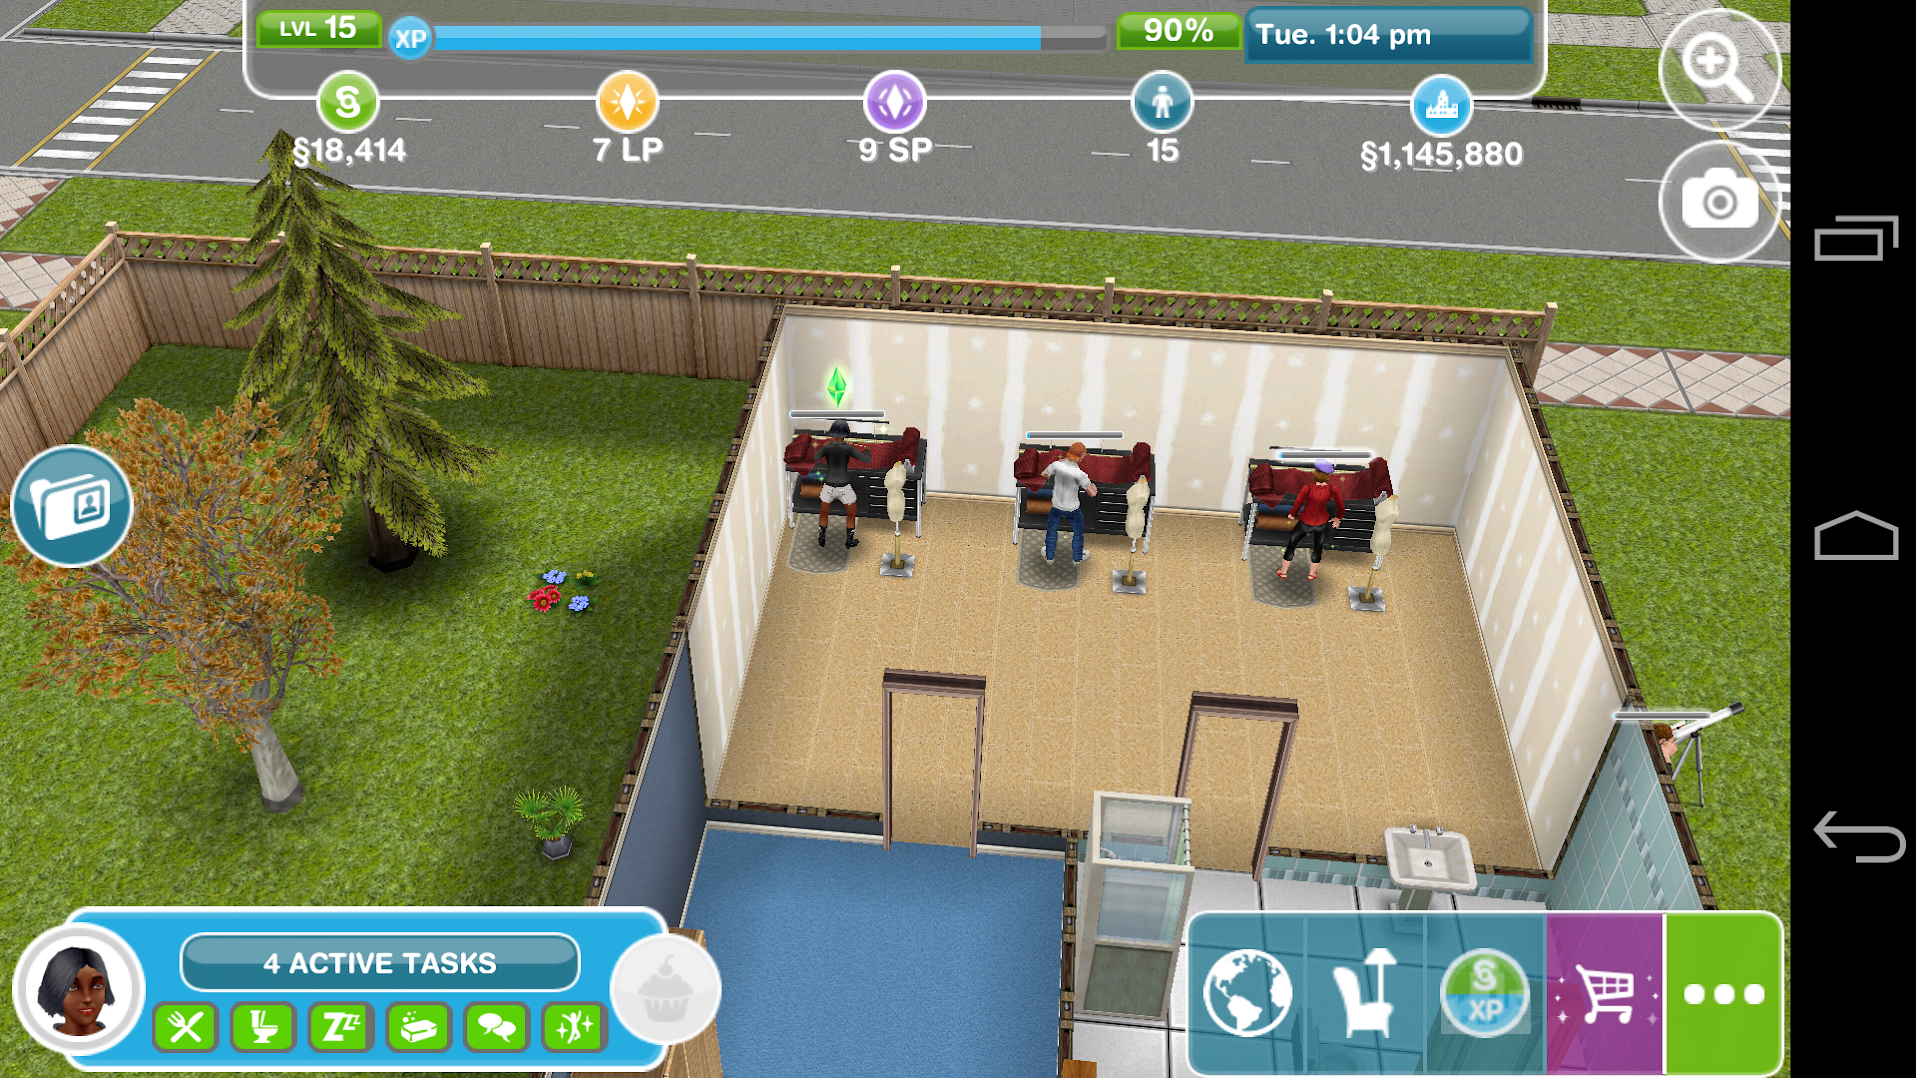 How To Get To Level 10 On Sims Freeplay Fast